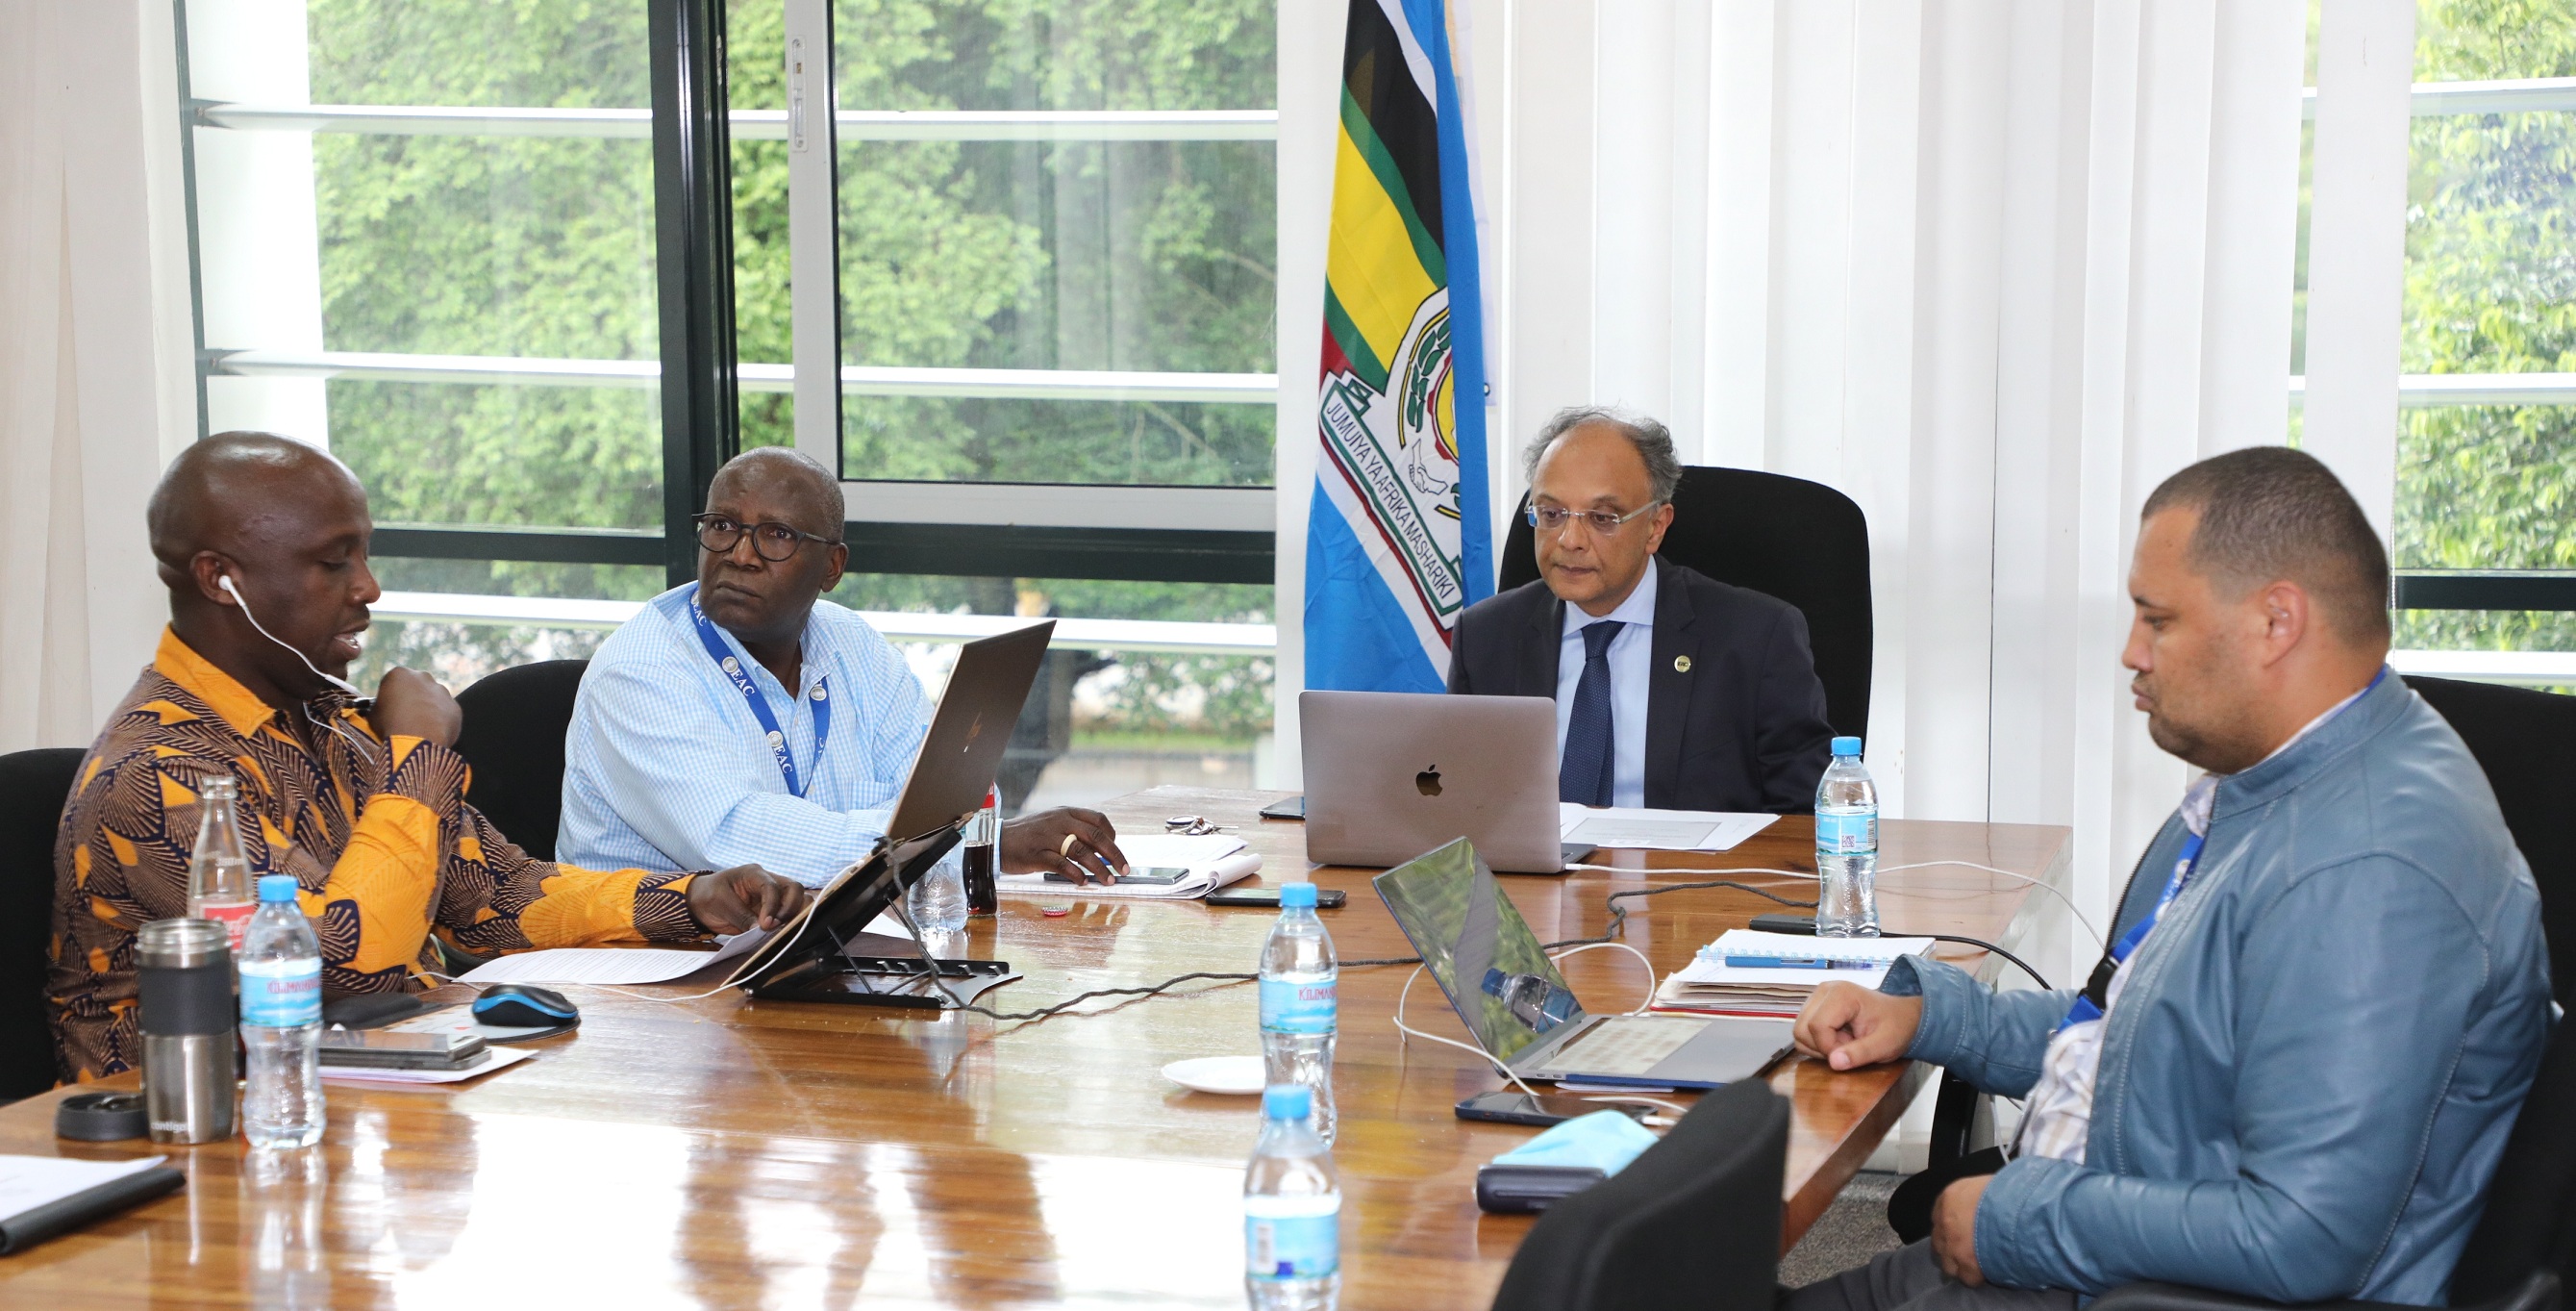 Kenya’s Permanent Secretary for EAC, Dr. Kevit Desai (second left) with EAC Secretariat officials (from left) Mr. Donald Tindamanyire, Mr. Geoffrey Osoro and Mr. Anthony Minja. 